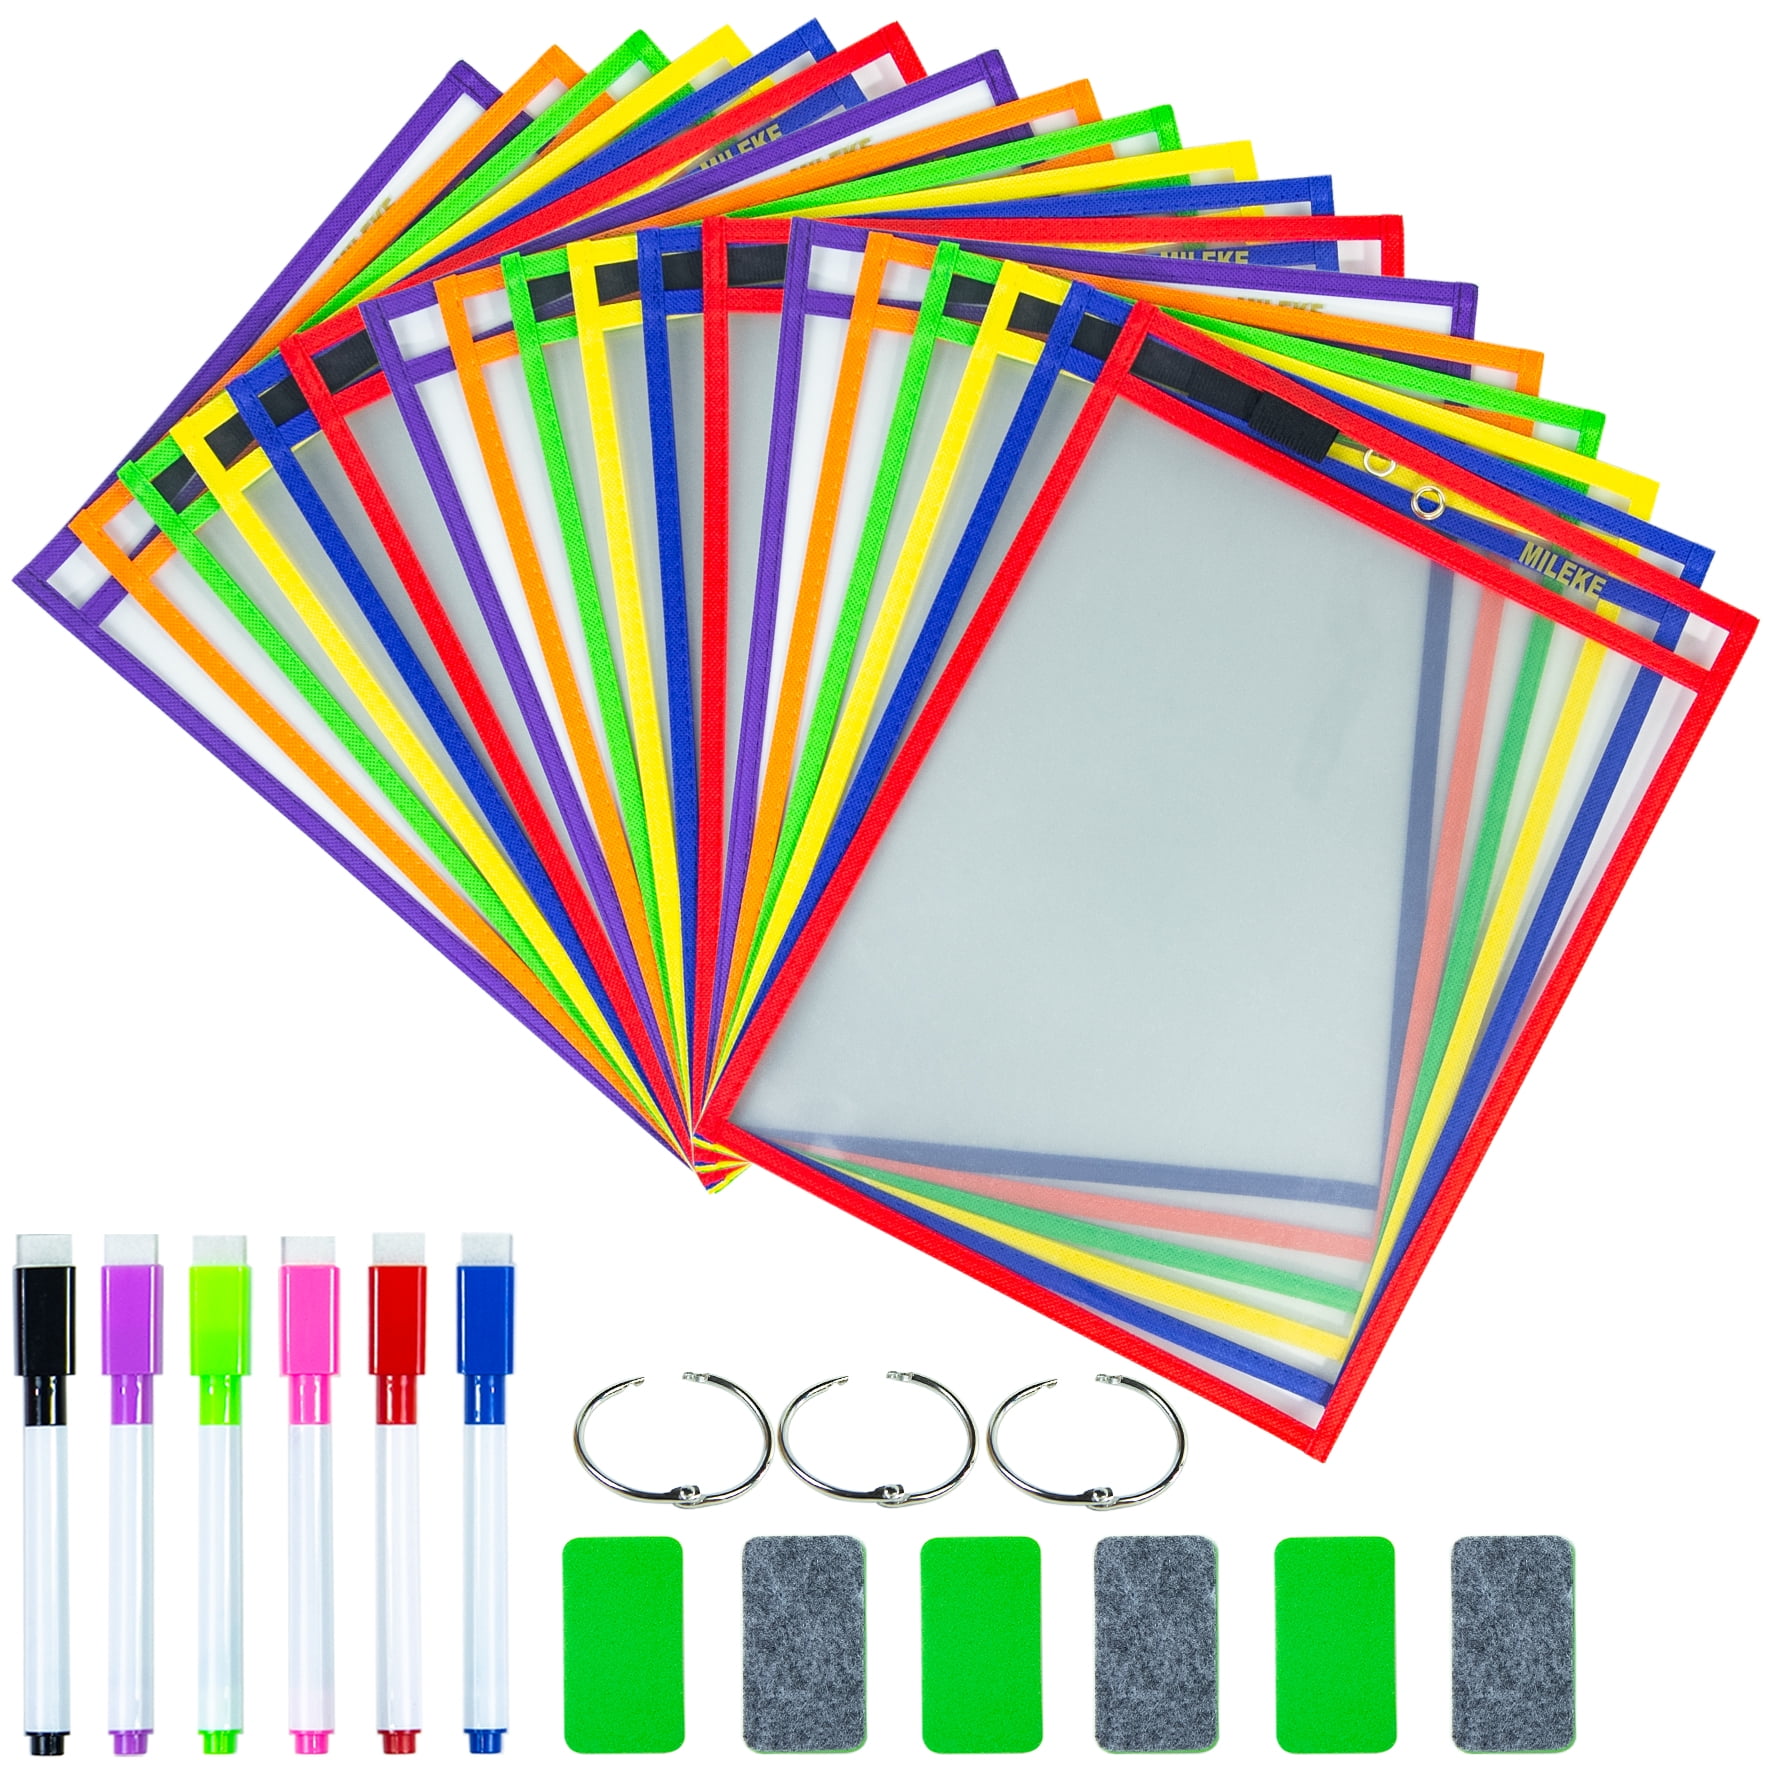 18pcs Dry Erase Pockets for Drawing & Practise, Rewritable Erase Sleeves  for A4 Paper for School teachers and students, Clear Work-sheet Protectors,  Plastic Ticket Holders, 6 Colors 